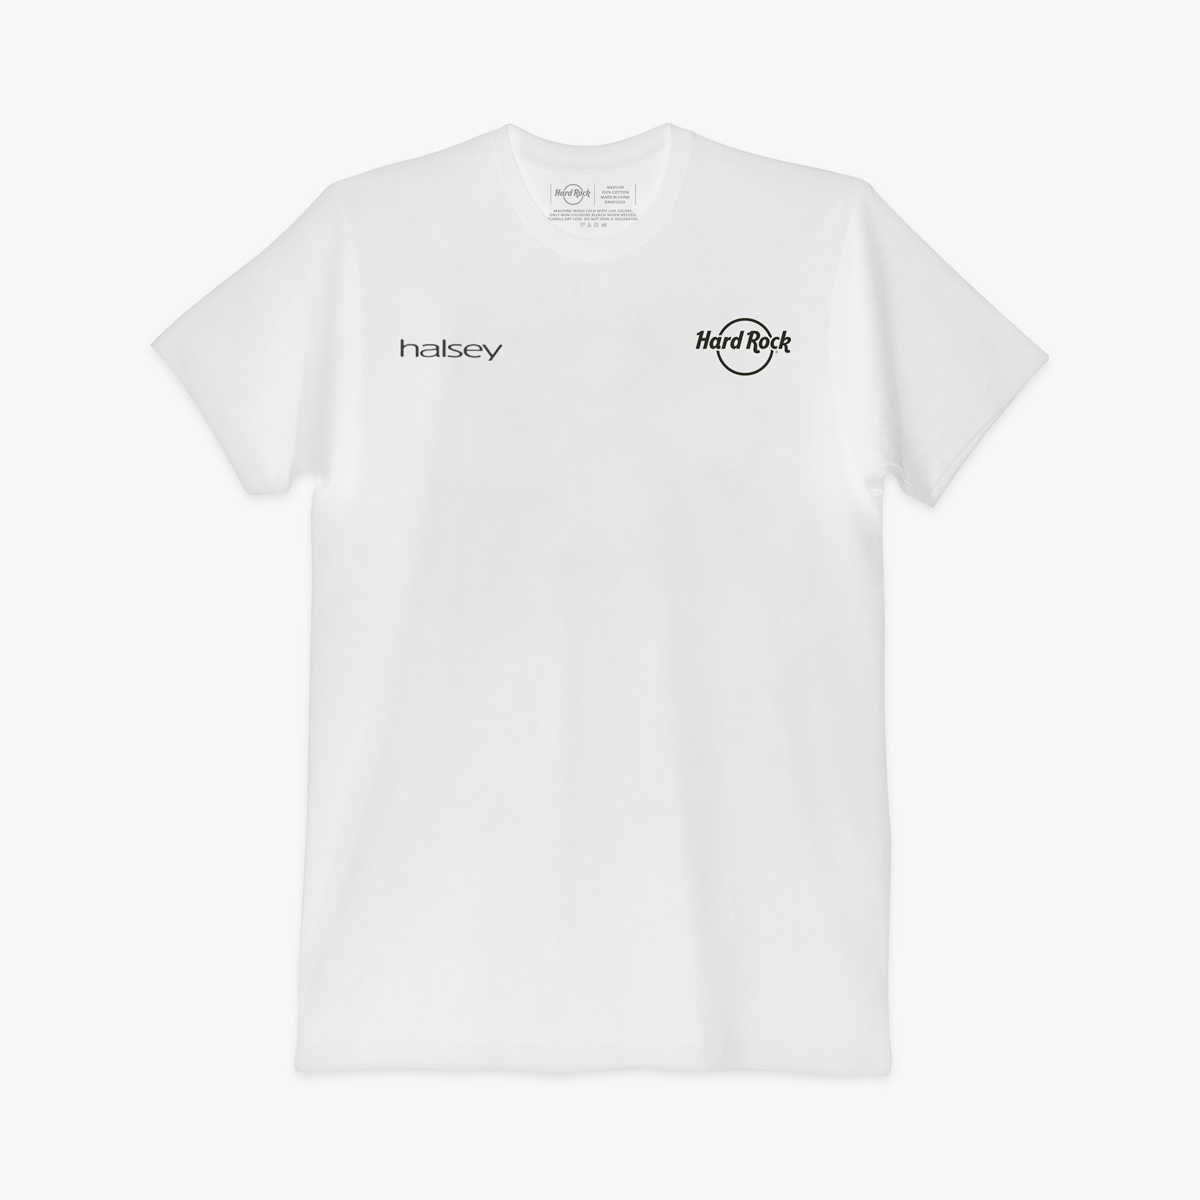 Halsey Adult Fit Tee with Circle Design image number 3